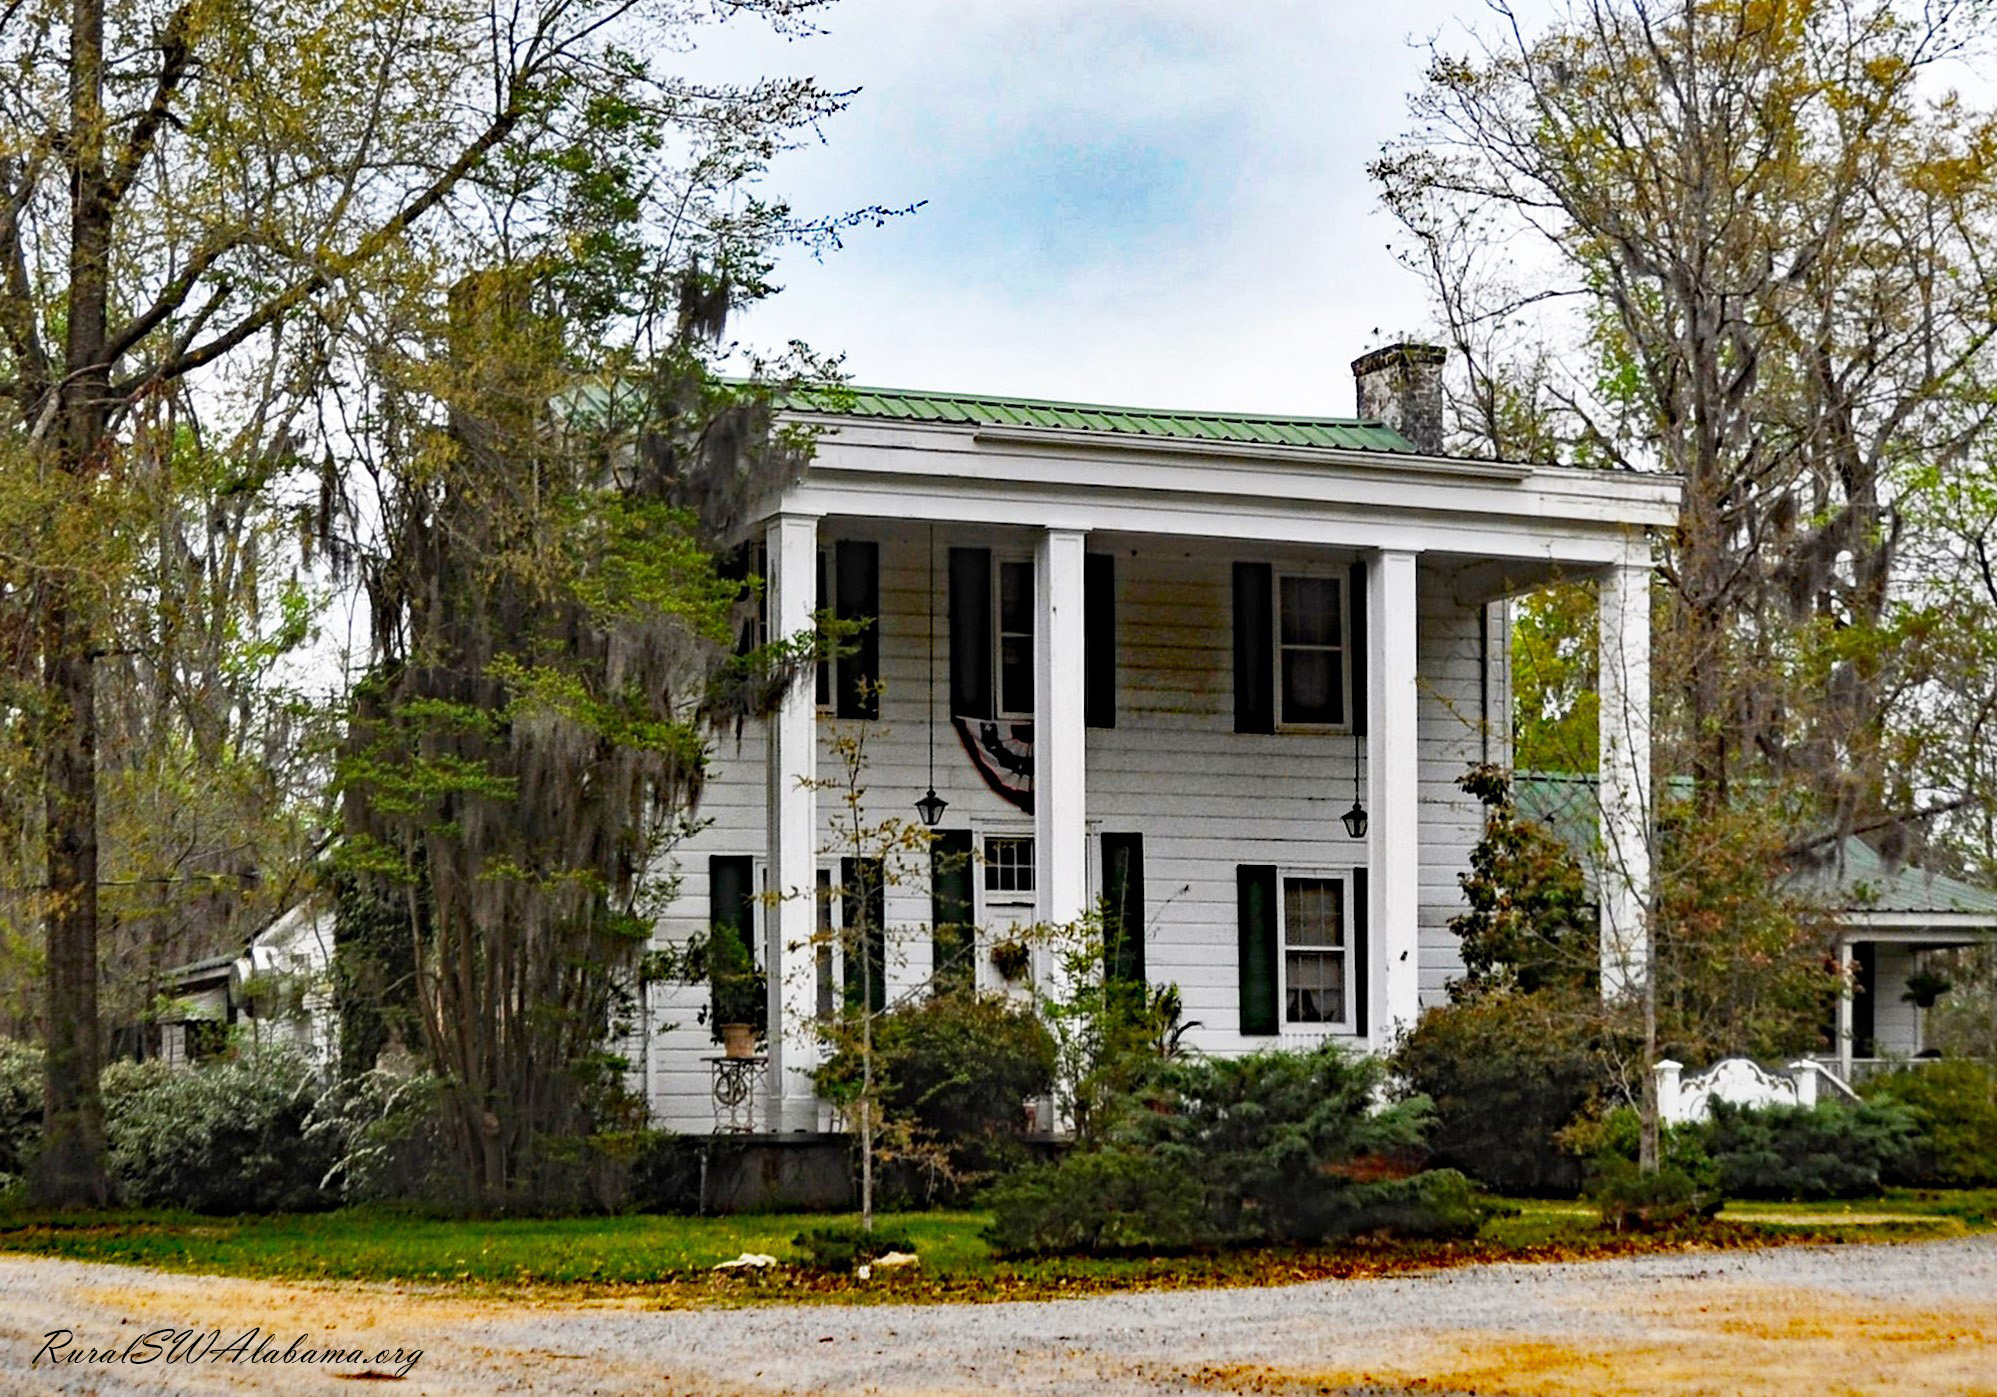 Gaines Ridge at Camden, AL (built late 1820s; building is now home ...